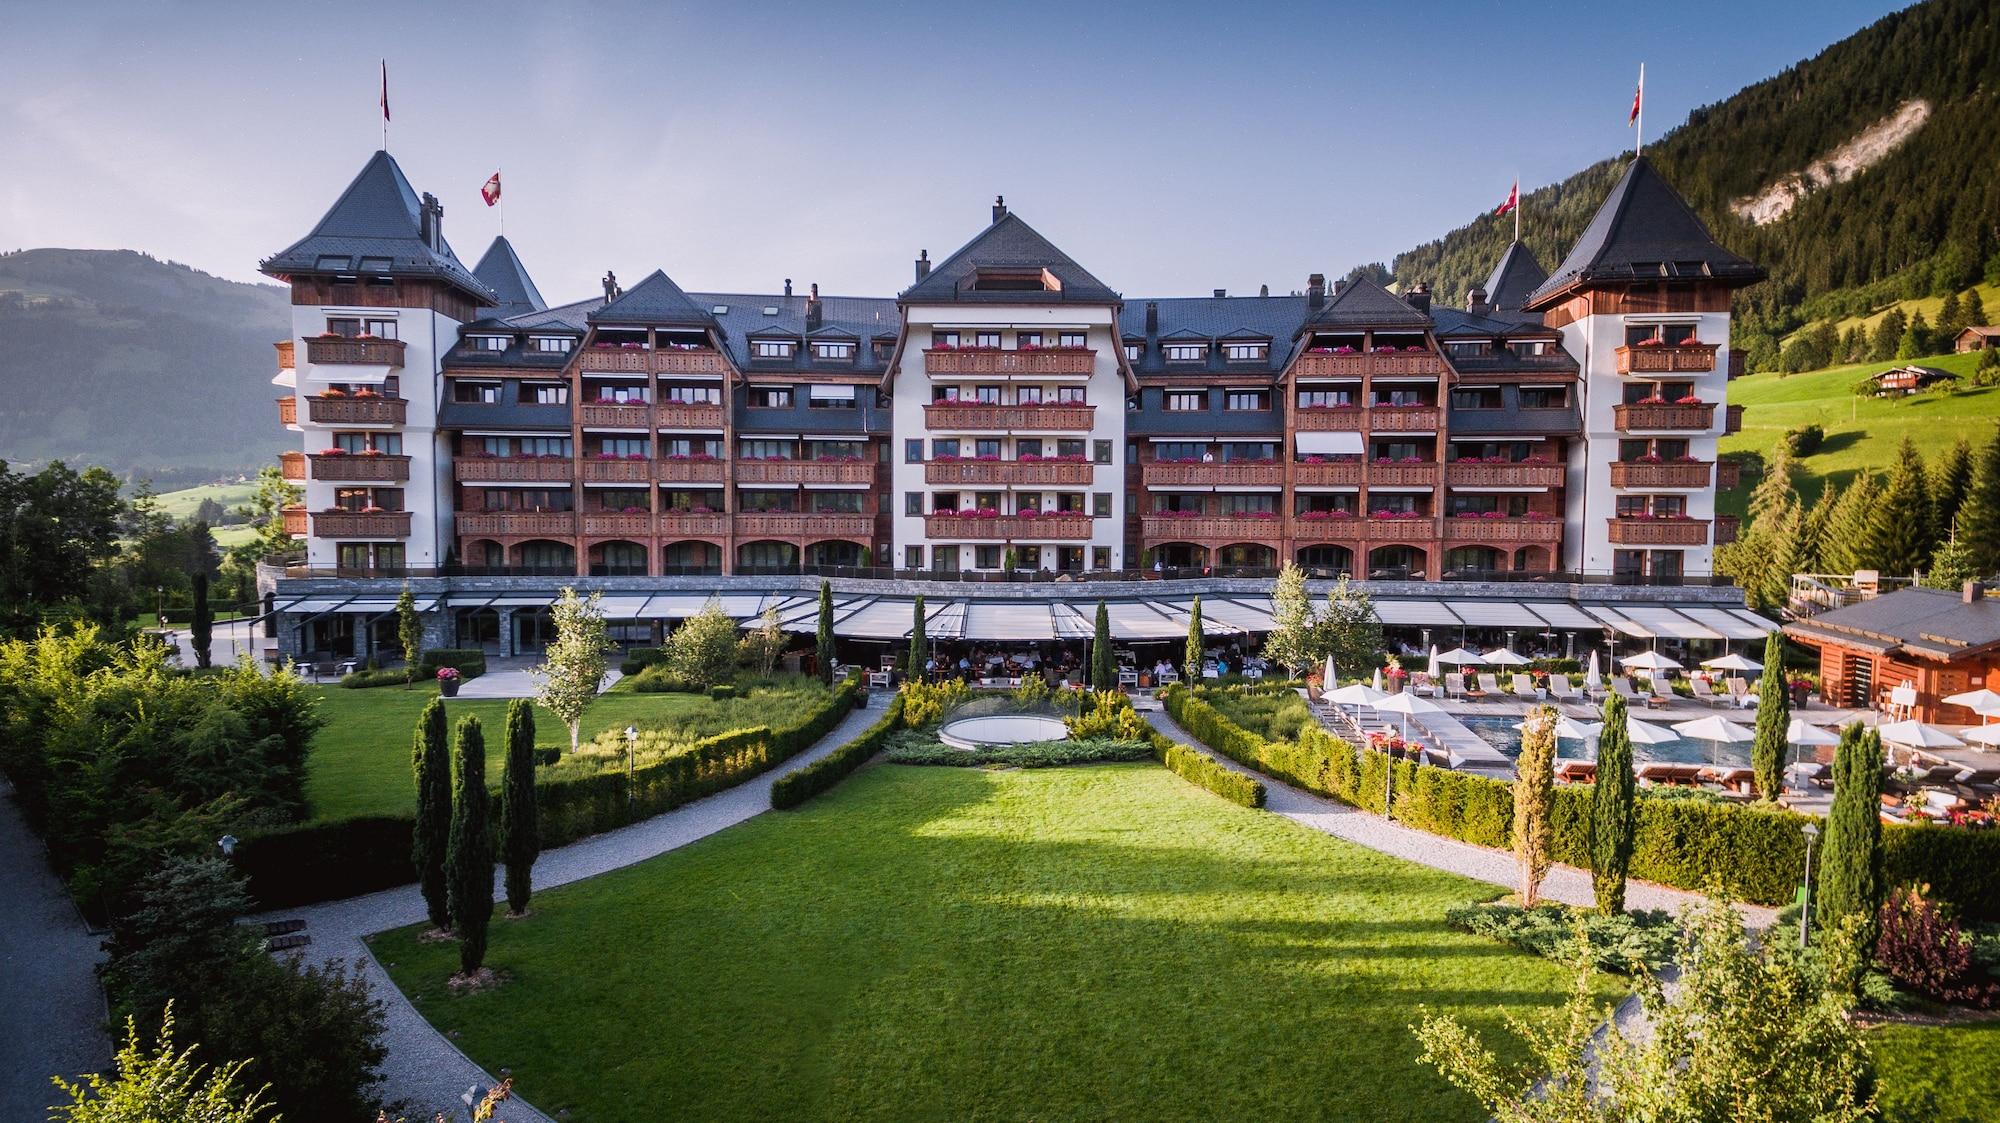 The Alpina Gstaad image